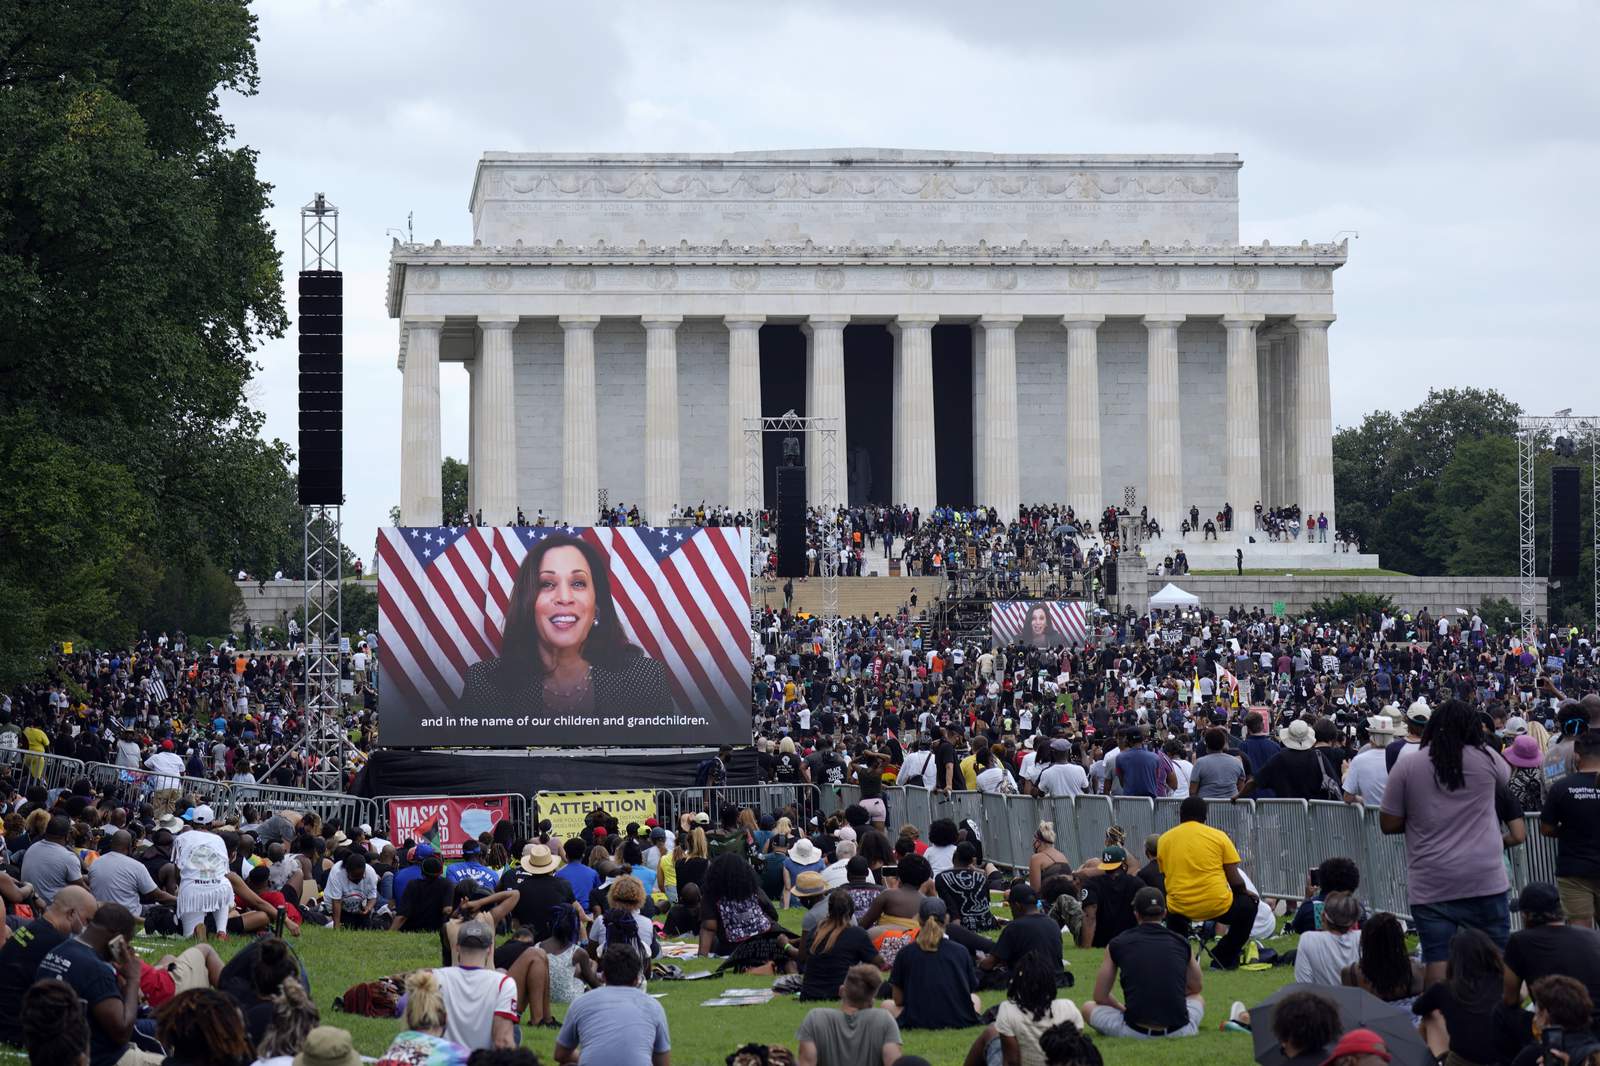 WATCH: Thousands expected for the March on Washington